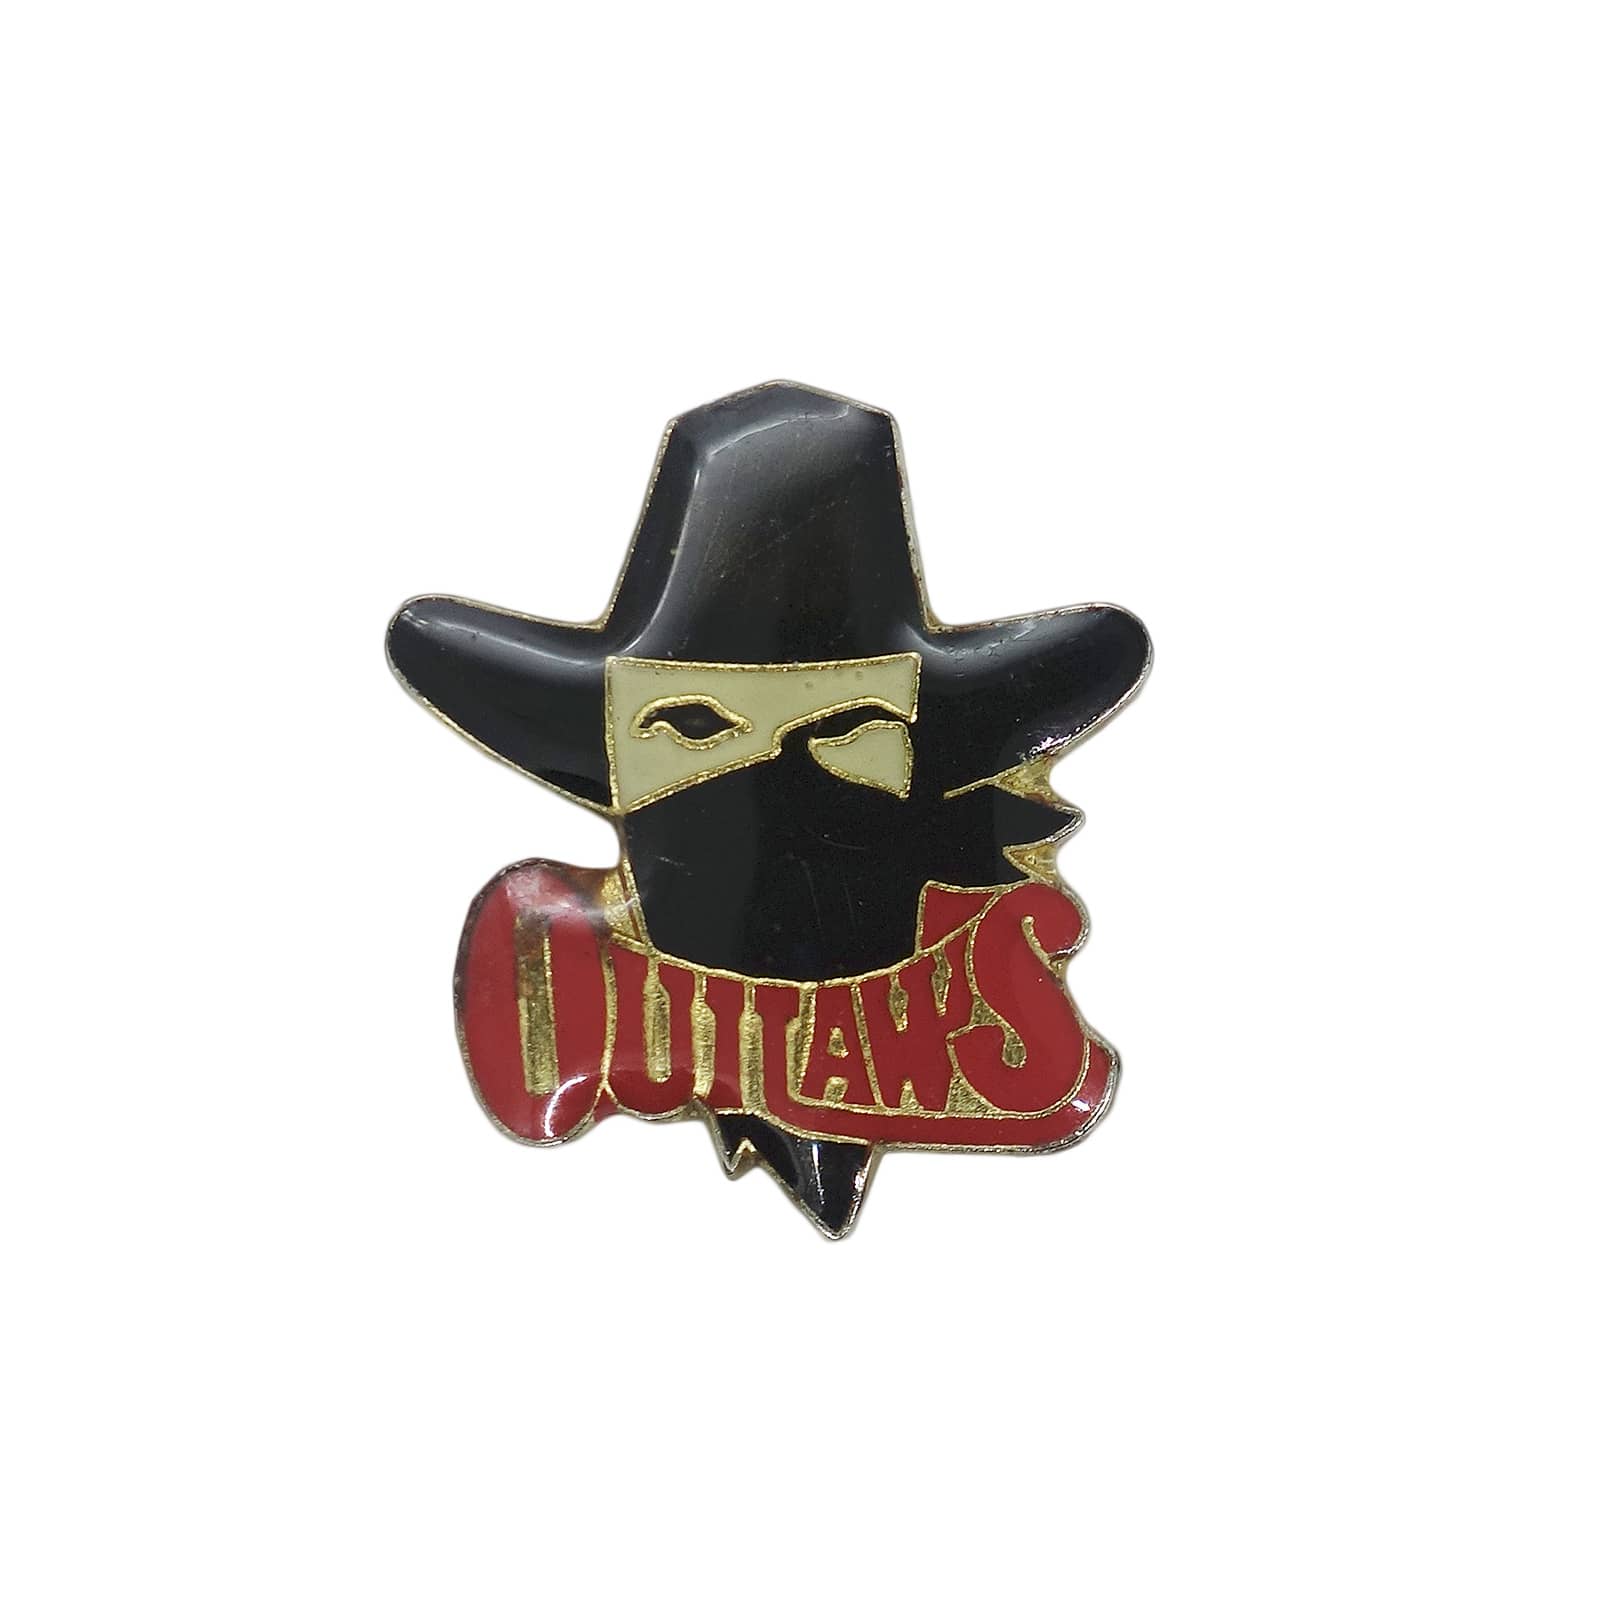 OUTLAWS ピンズ 留め具付き